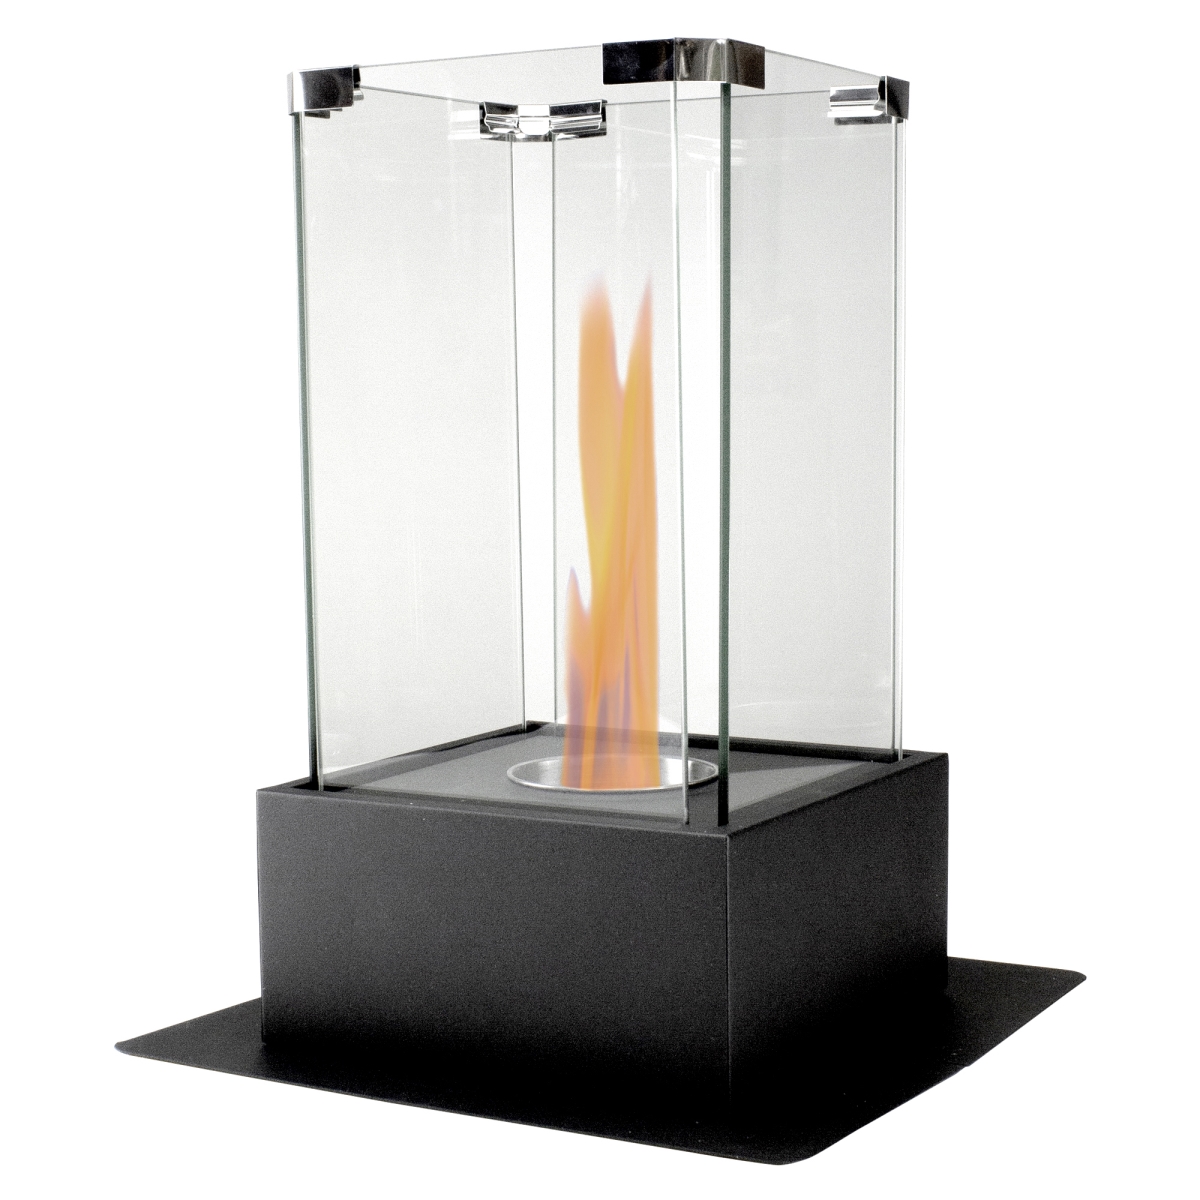 Picture of NorthLight 34808729 15 in. Bio Ethanol Ventless Portable Tabletop Fireplace with Flame Guard